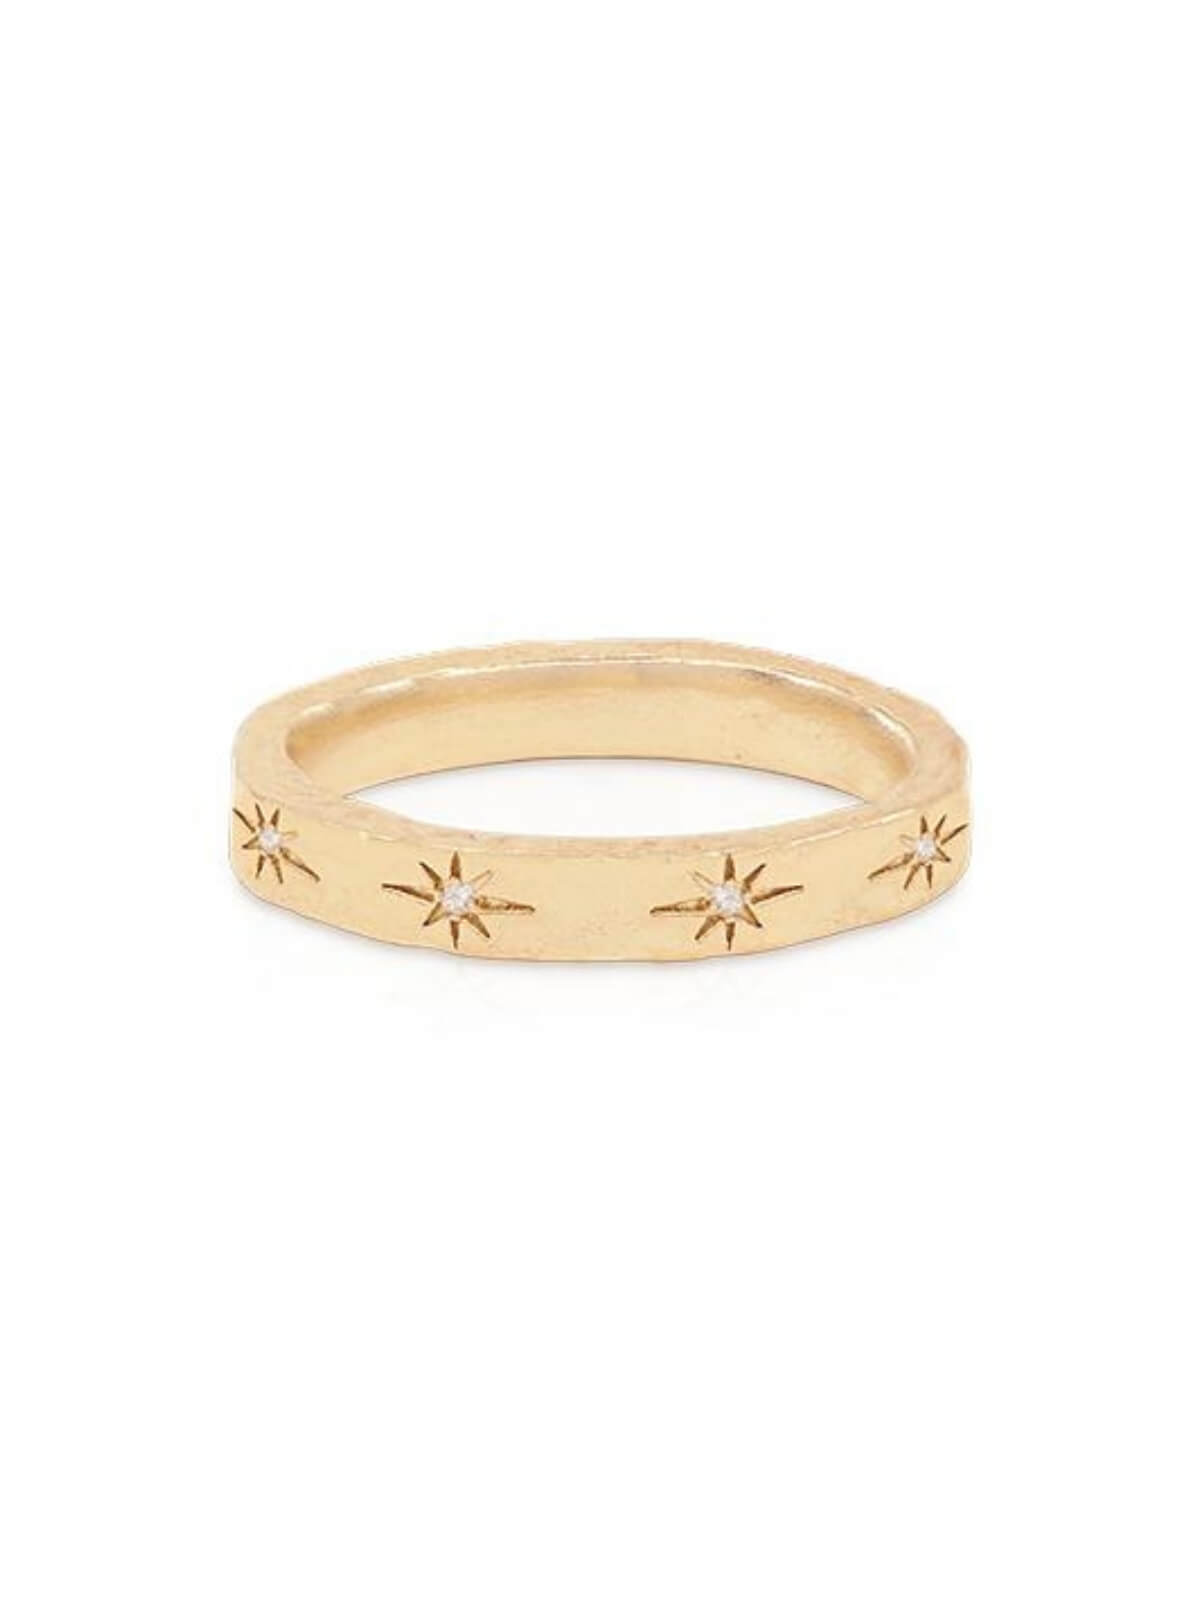 By Charlotte | Stardust Ring - Gold | Perlu